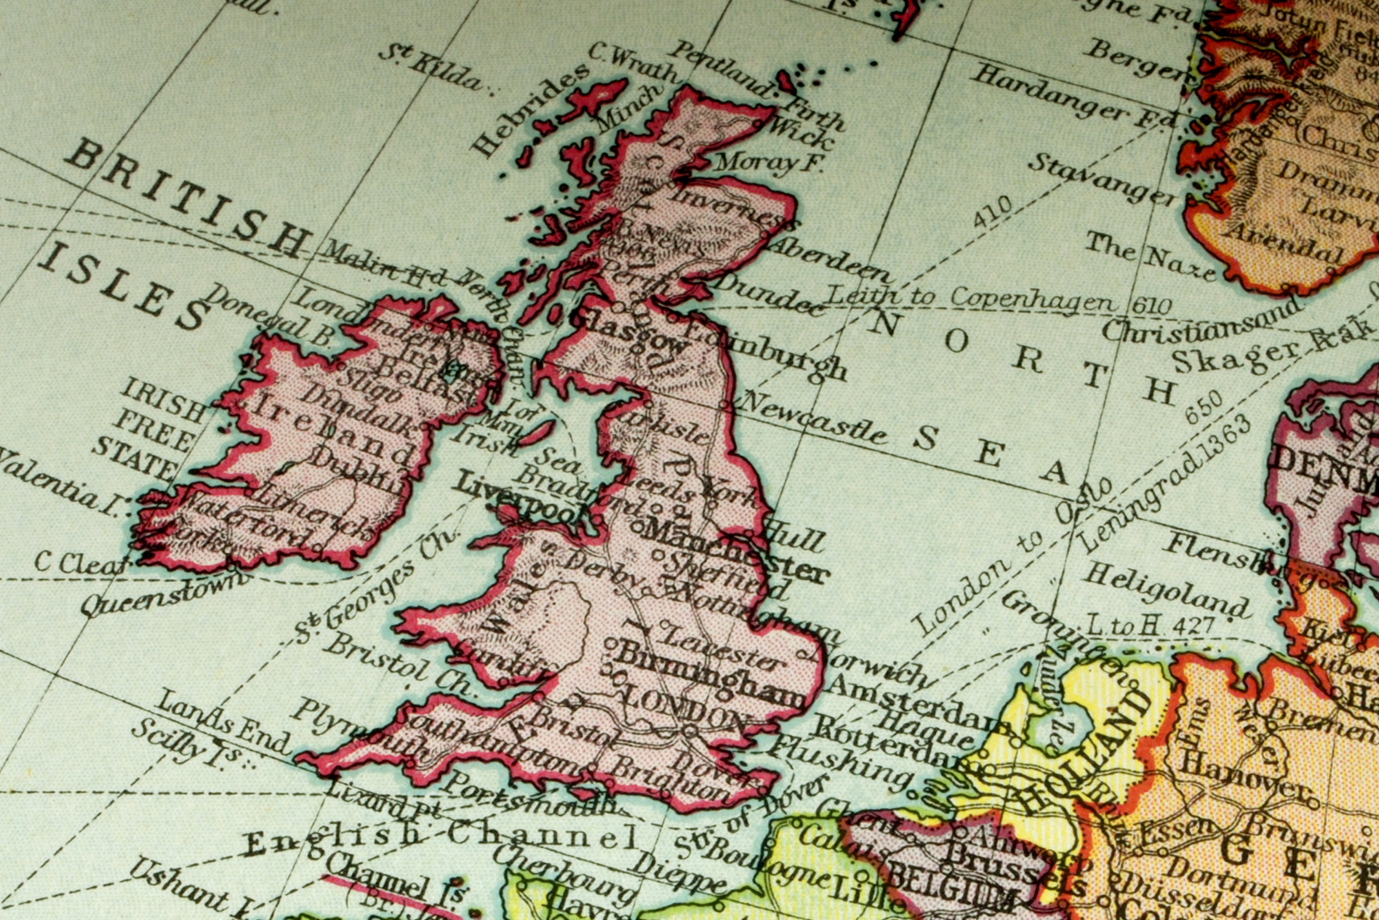 A map of Great Britain and Ireland